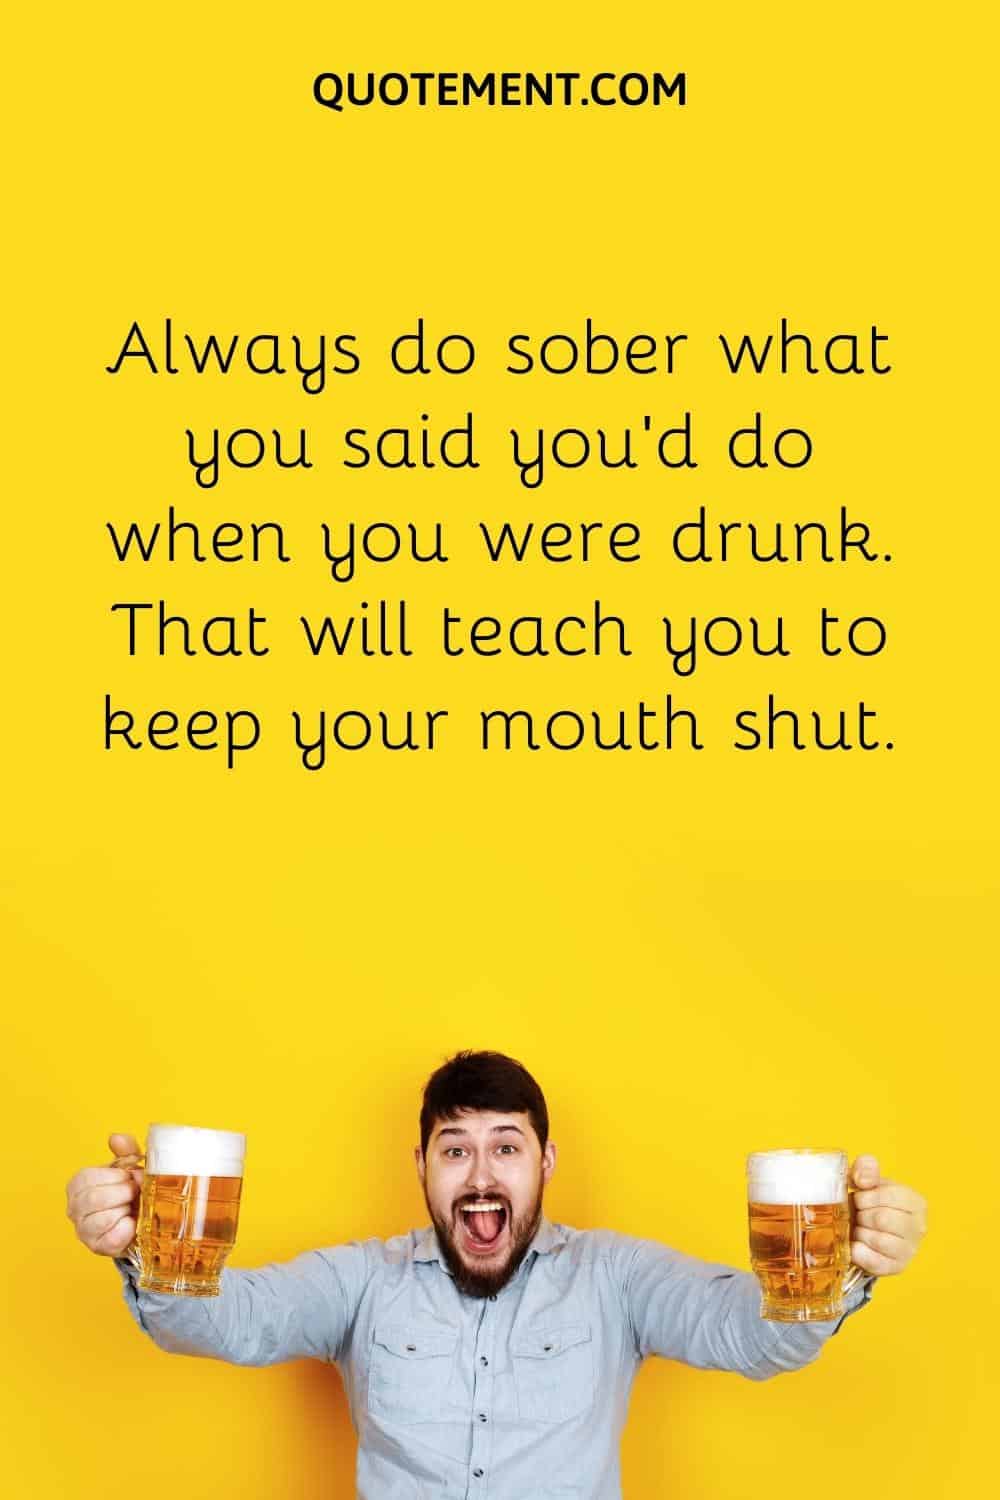 Always do sober what you said you’d do when you were drunk. That will teach you to keep your mouth shut.